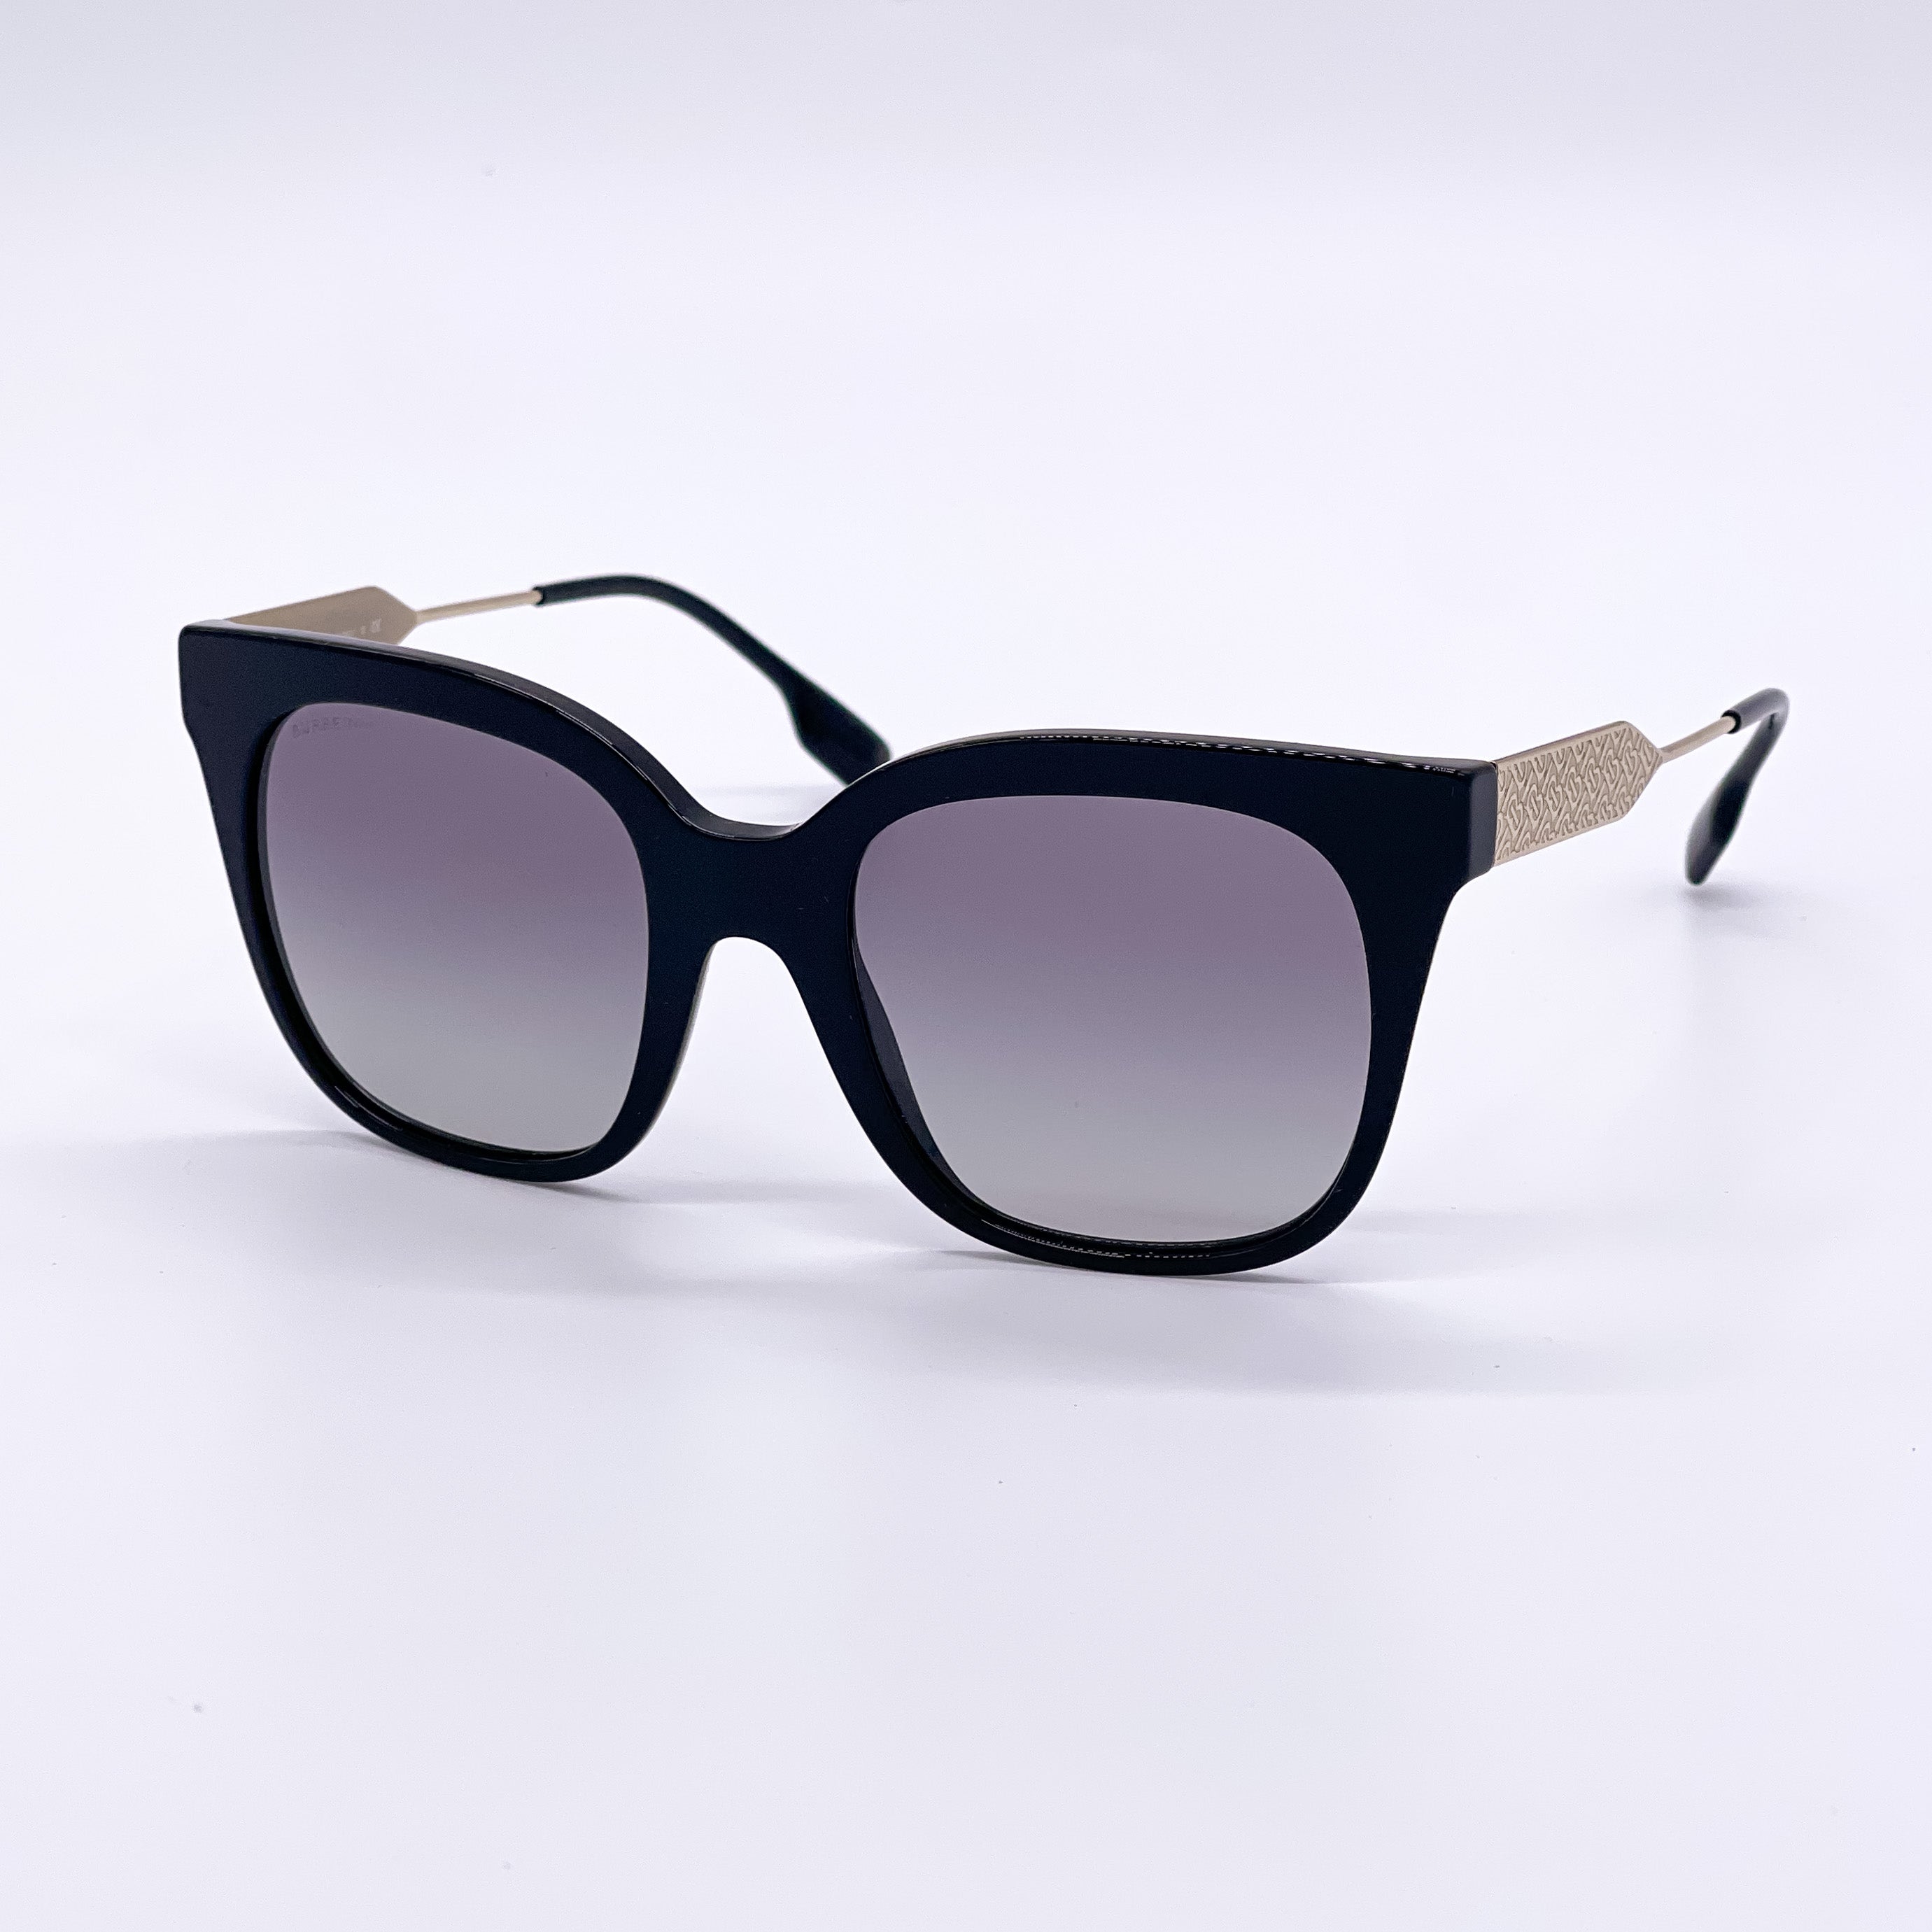 BURBERRY EVELYN BE4328 3001/11 SUNGLASSES